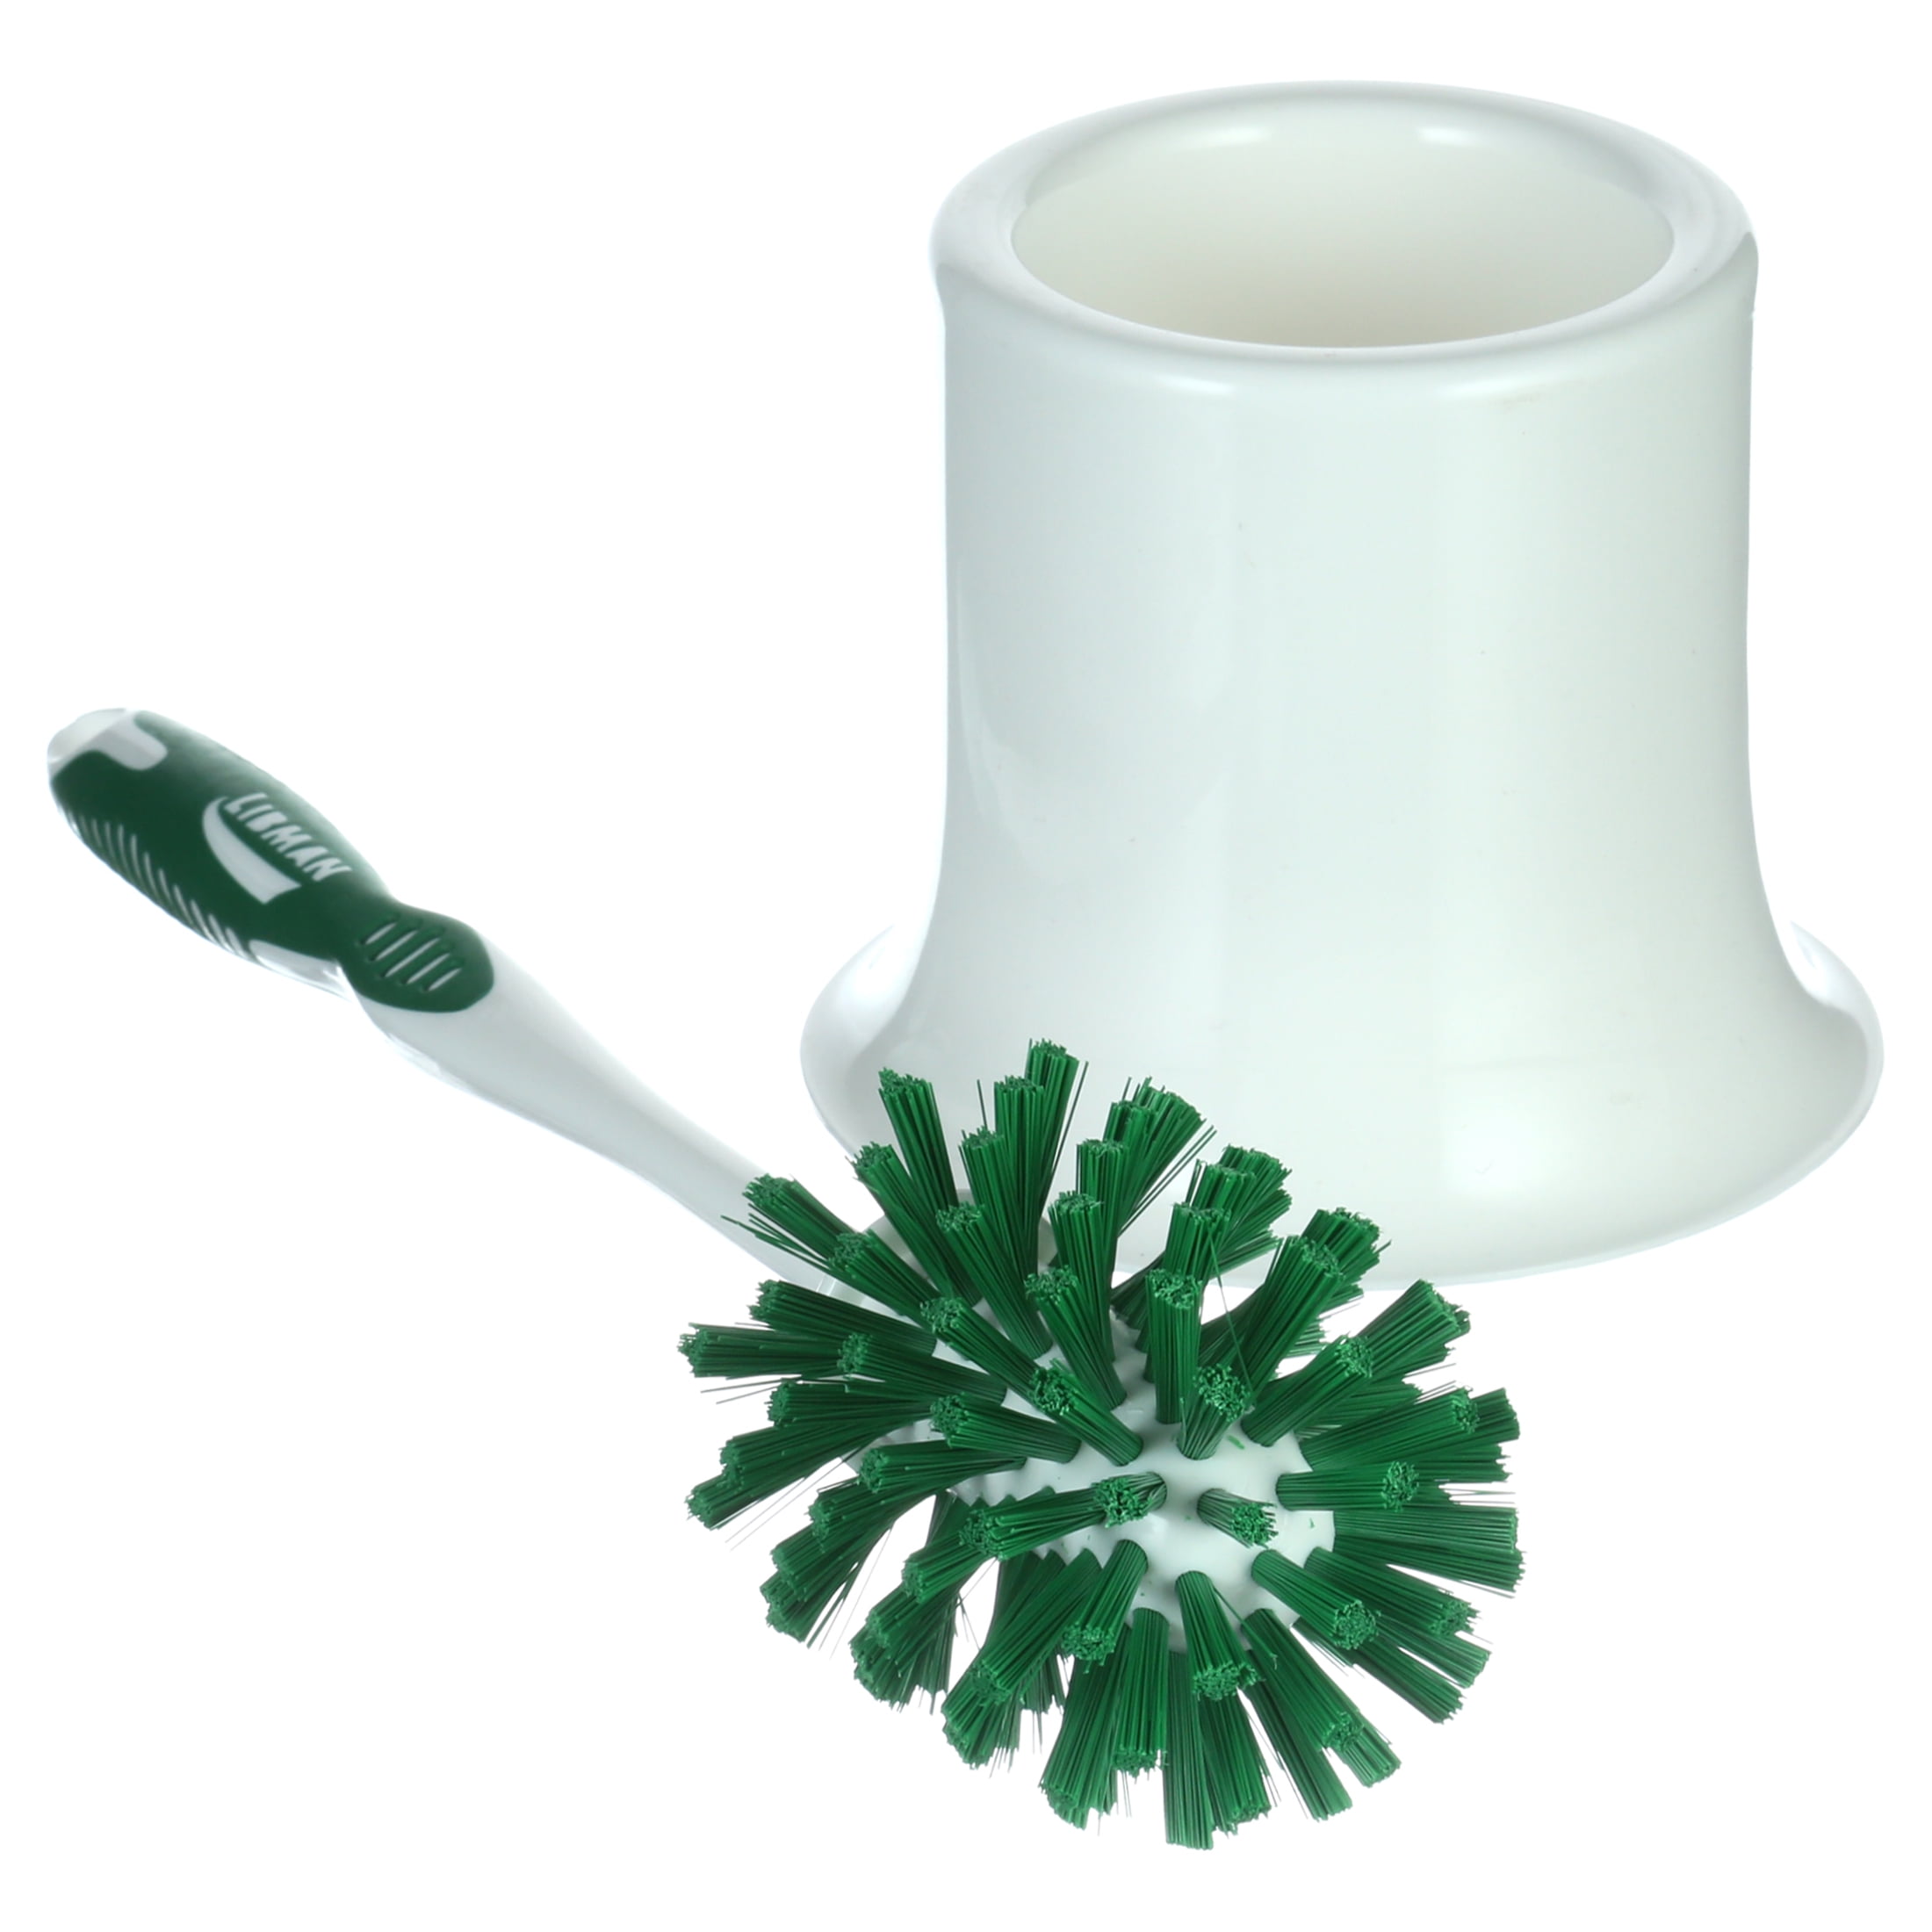 Libman® Toilet Bowl Brush and Caddy, 1 ct - City Market